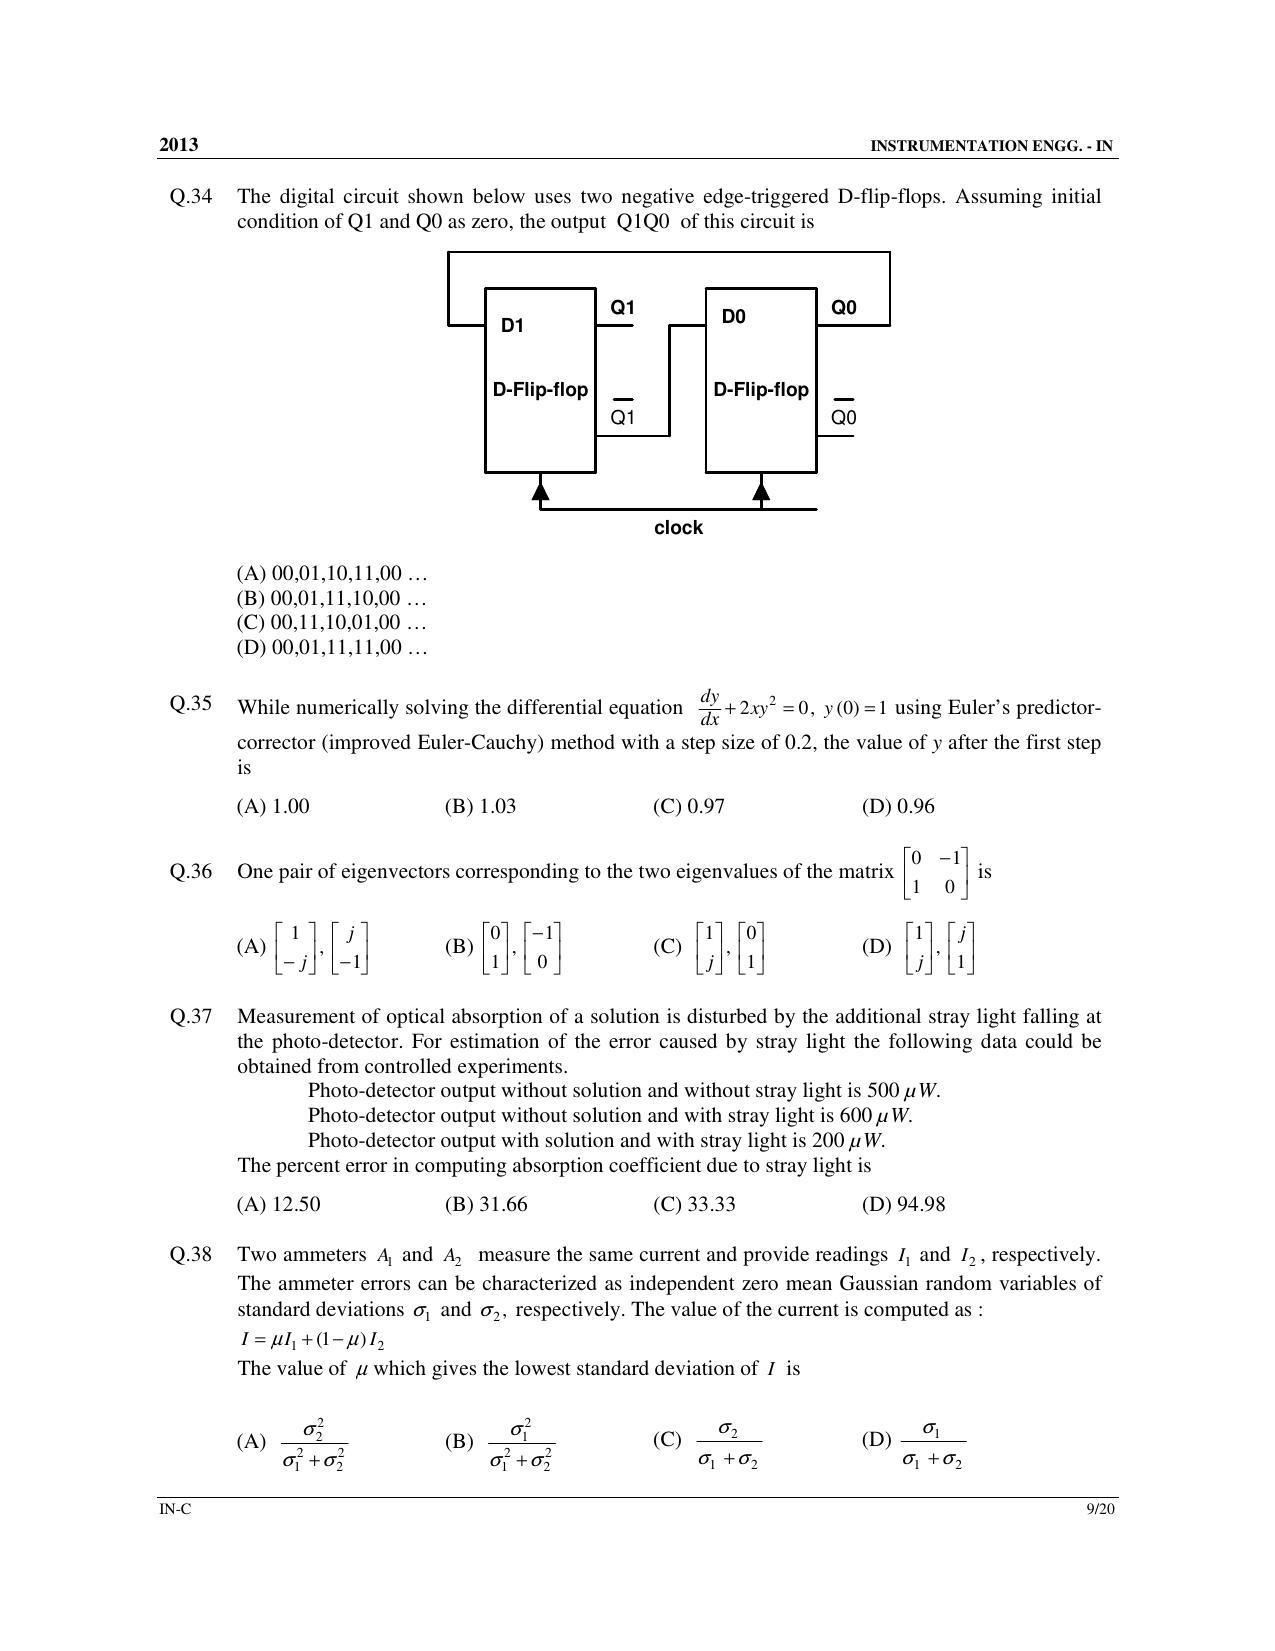 GATE 2013 Instrumentation Engineering (IN) Question Paper with Answer Key - Page 44